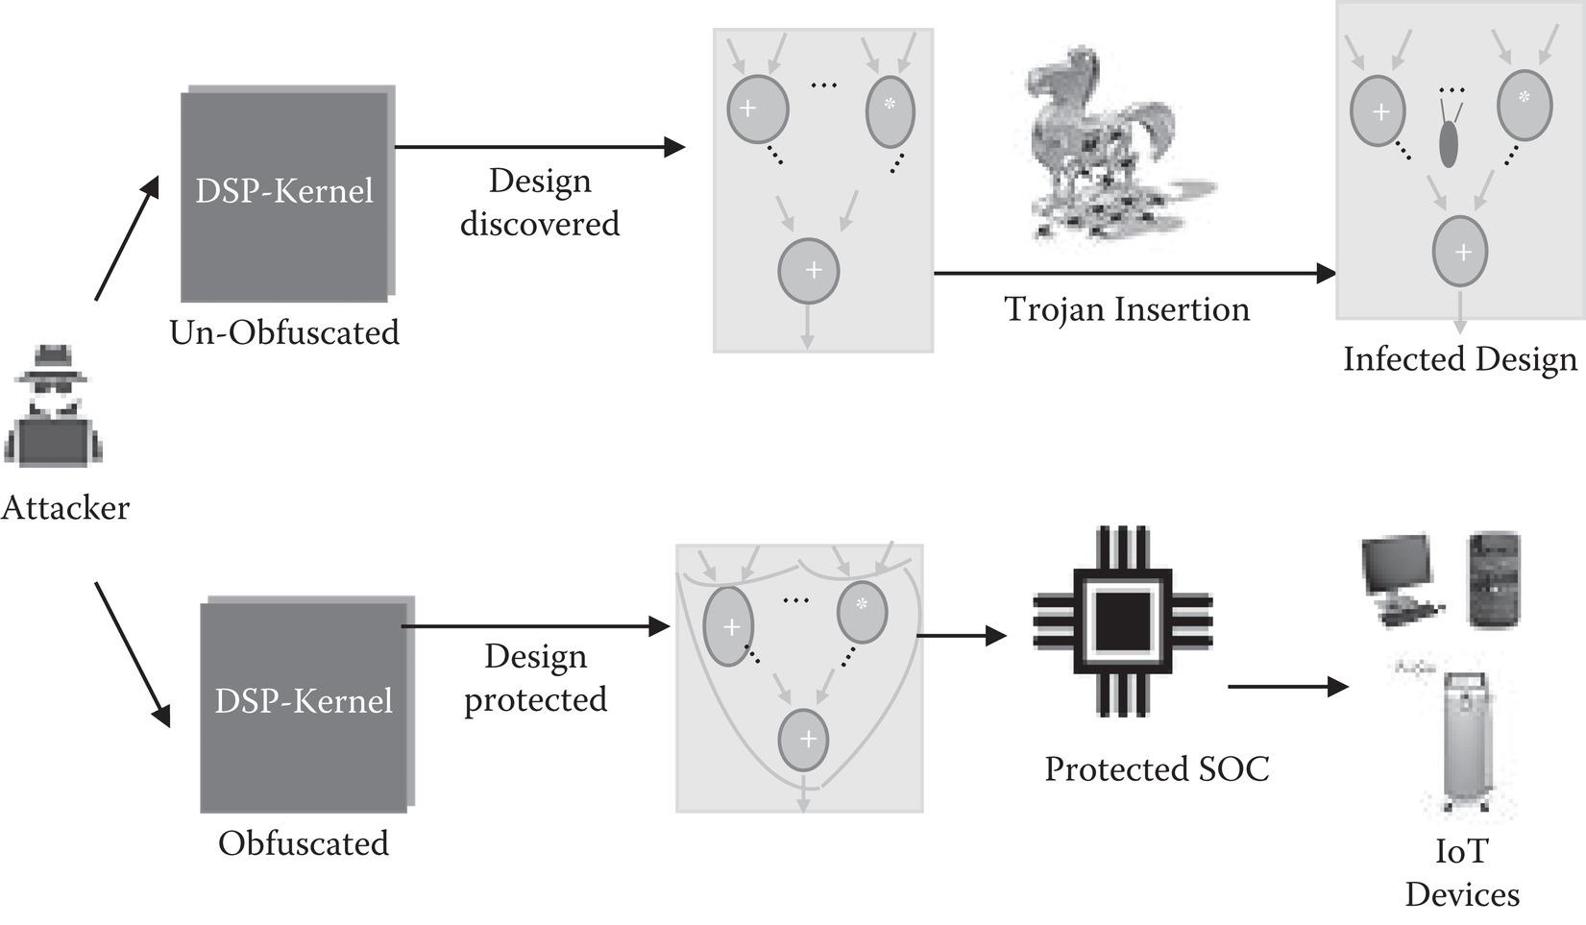 Figure 11 Typical attack and protection scenario for IoT devices 12 - photo 1